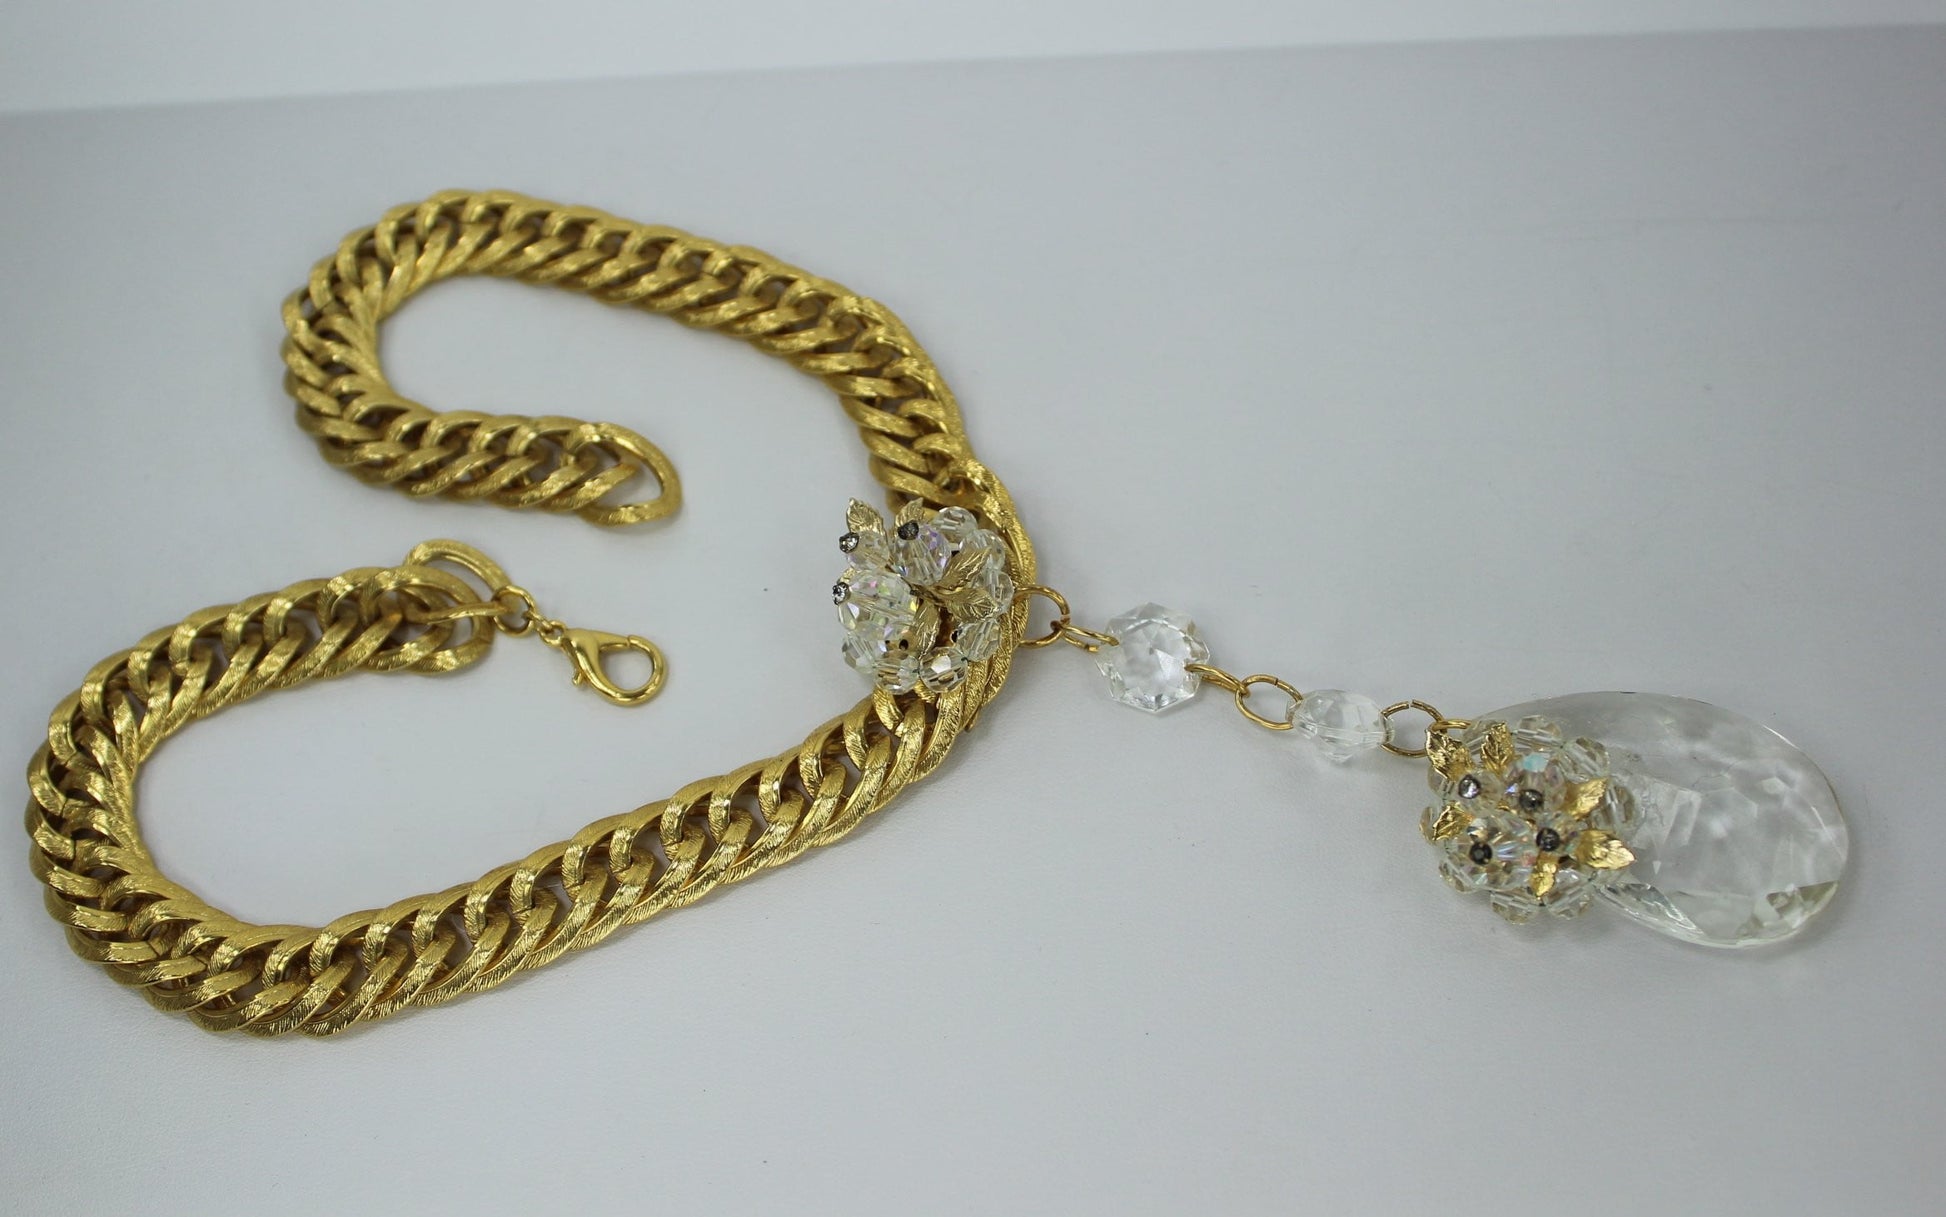 Vintage New Prism Necklace Patzi Re-Design RS Heavy Gold Tone Chain wedding